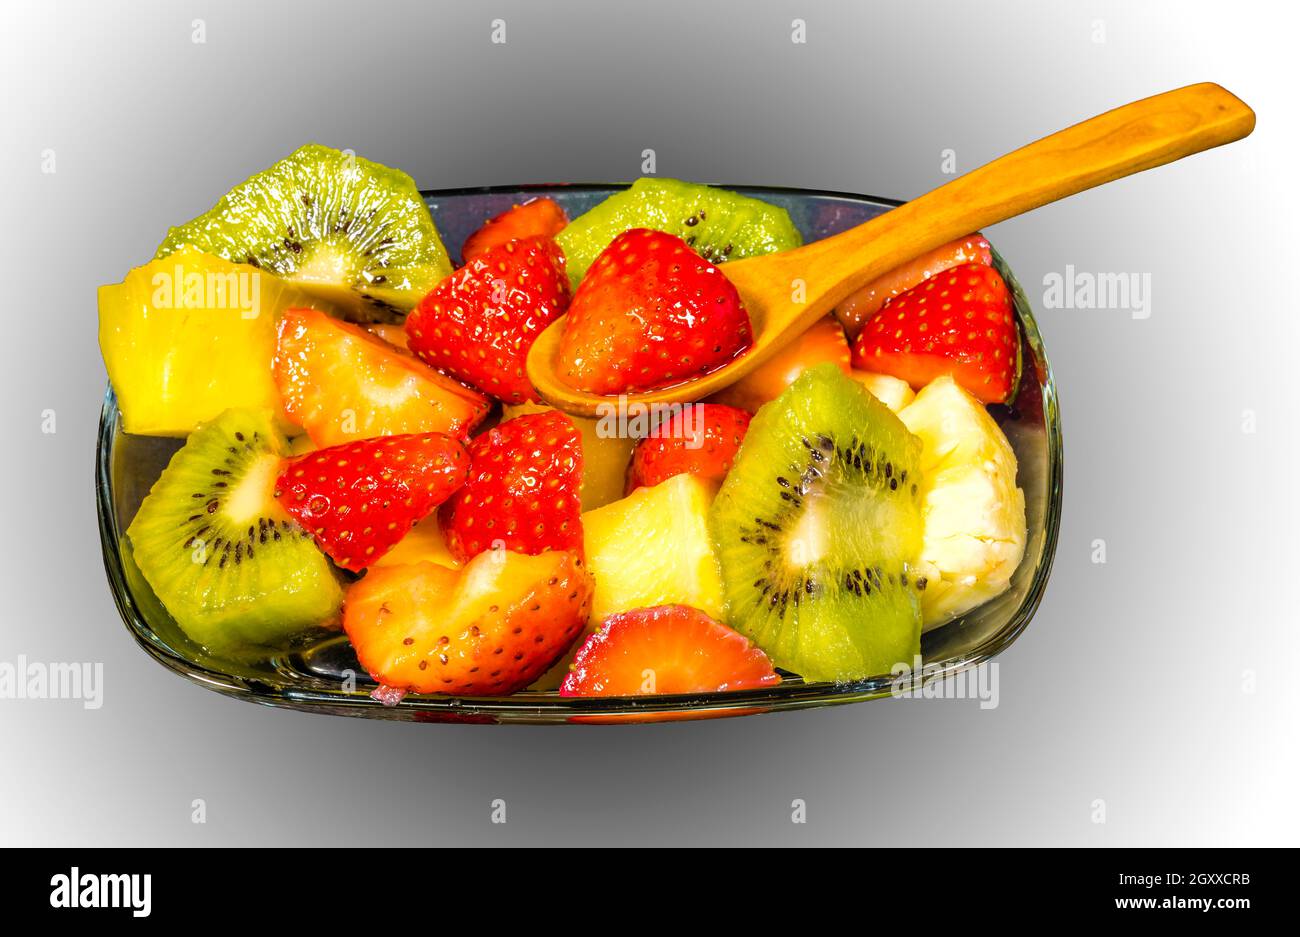 fresh fruit macedonia cut into cubes, Isolated gradient background with spoon Stock Photo